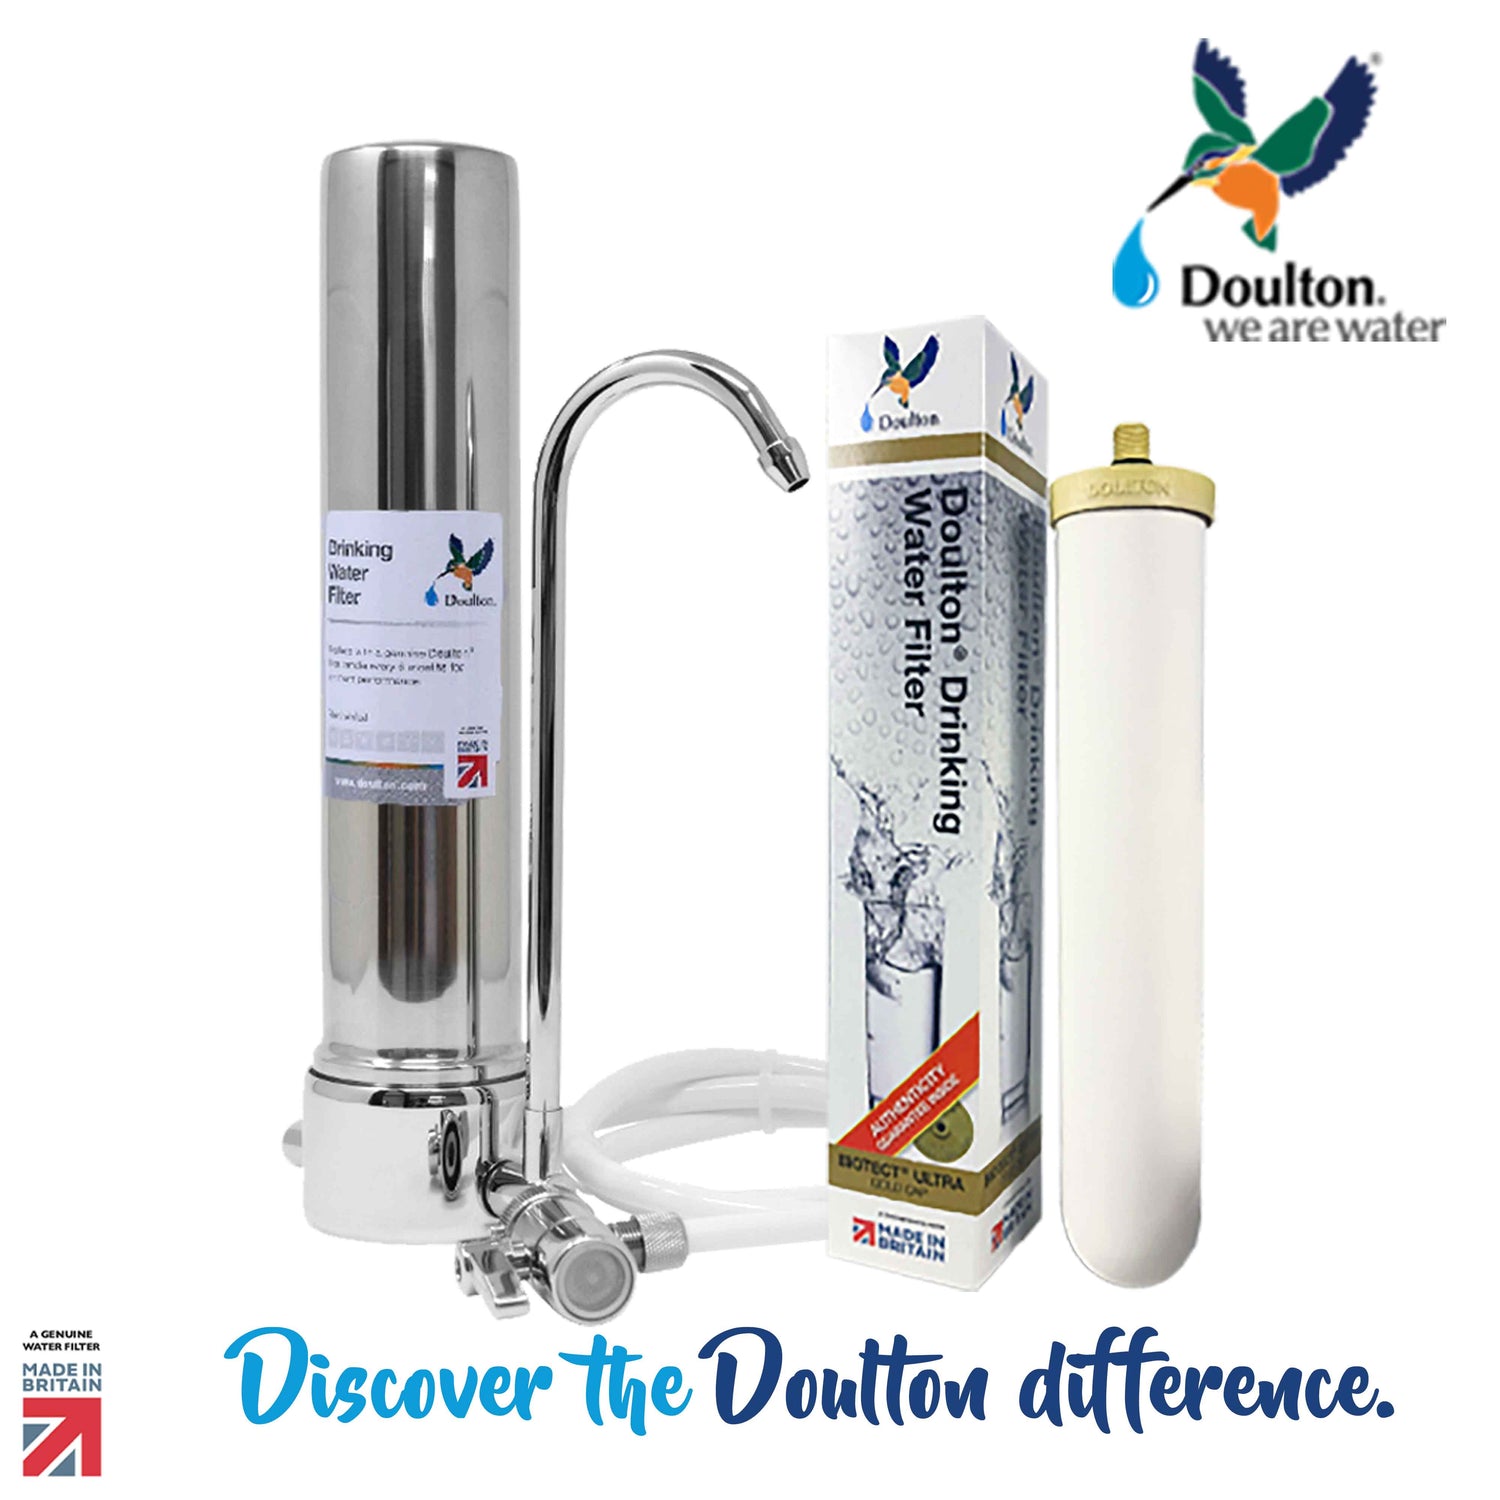 Experience the British Legacy of Purity: Doulton DCS Stainless Steel Biotect Ultra 2501 (NSF) Drinking Water Purifier - Craftsmanship Since 1826 (*FREE 2ND YEAR BTU FILTER! RM299)